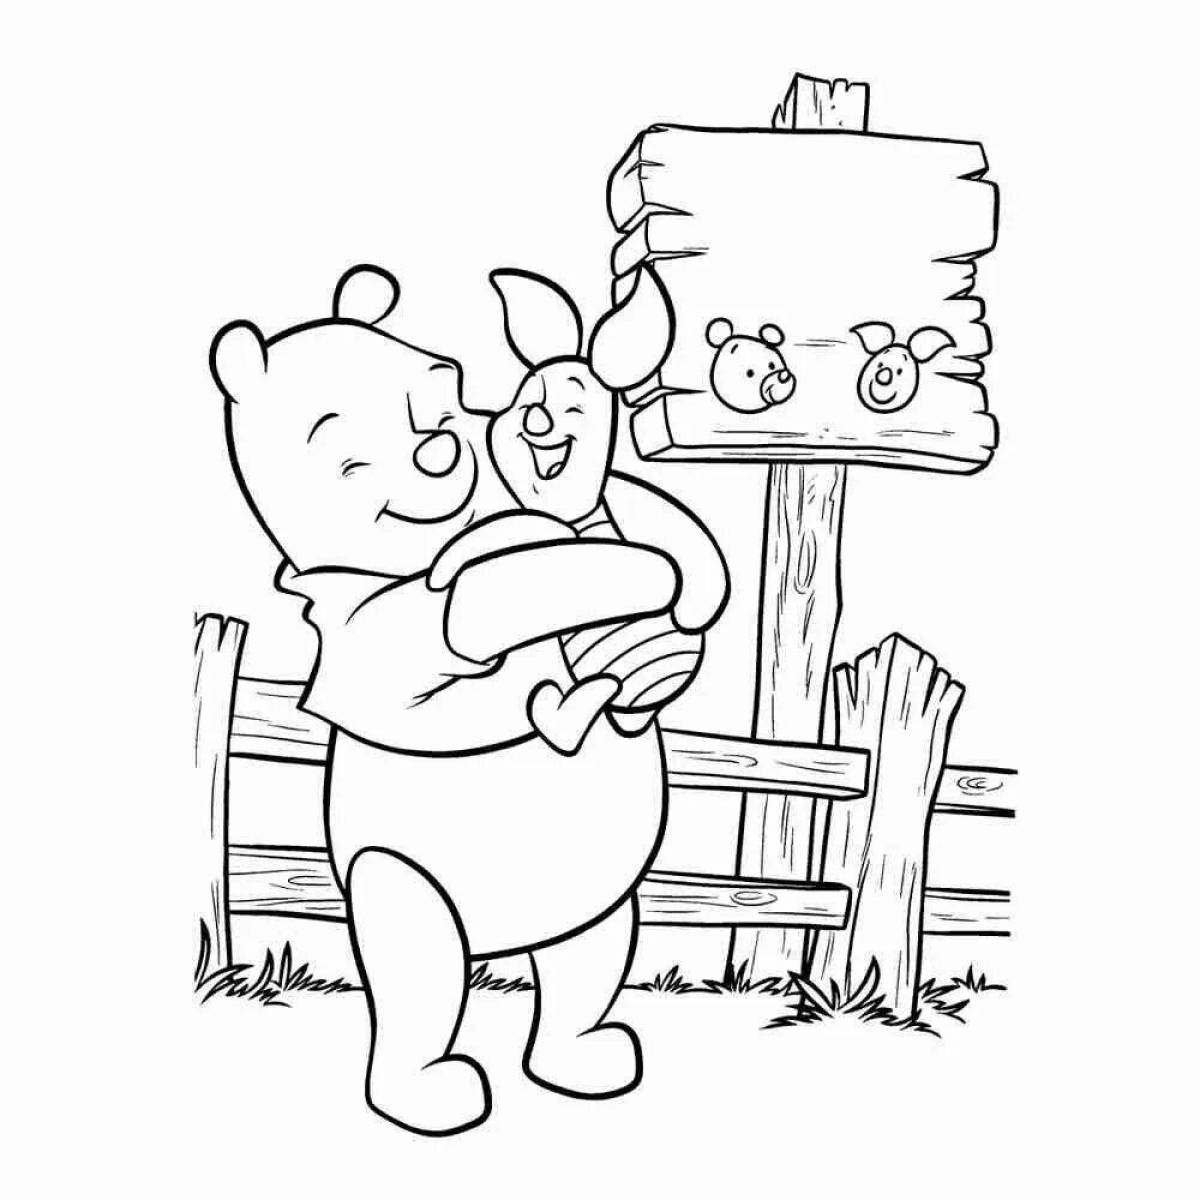 Adorable pig and winnipoo coloring book